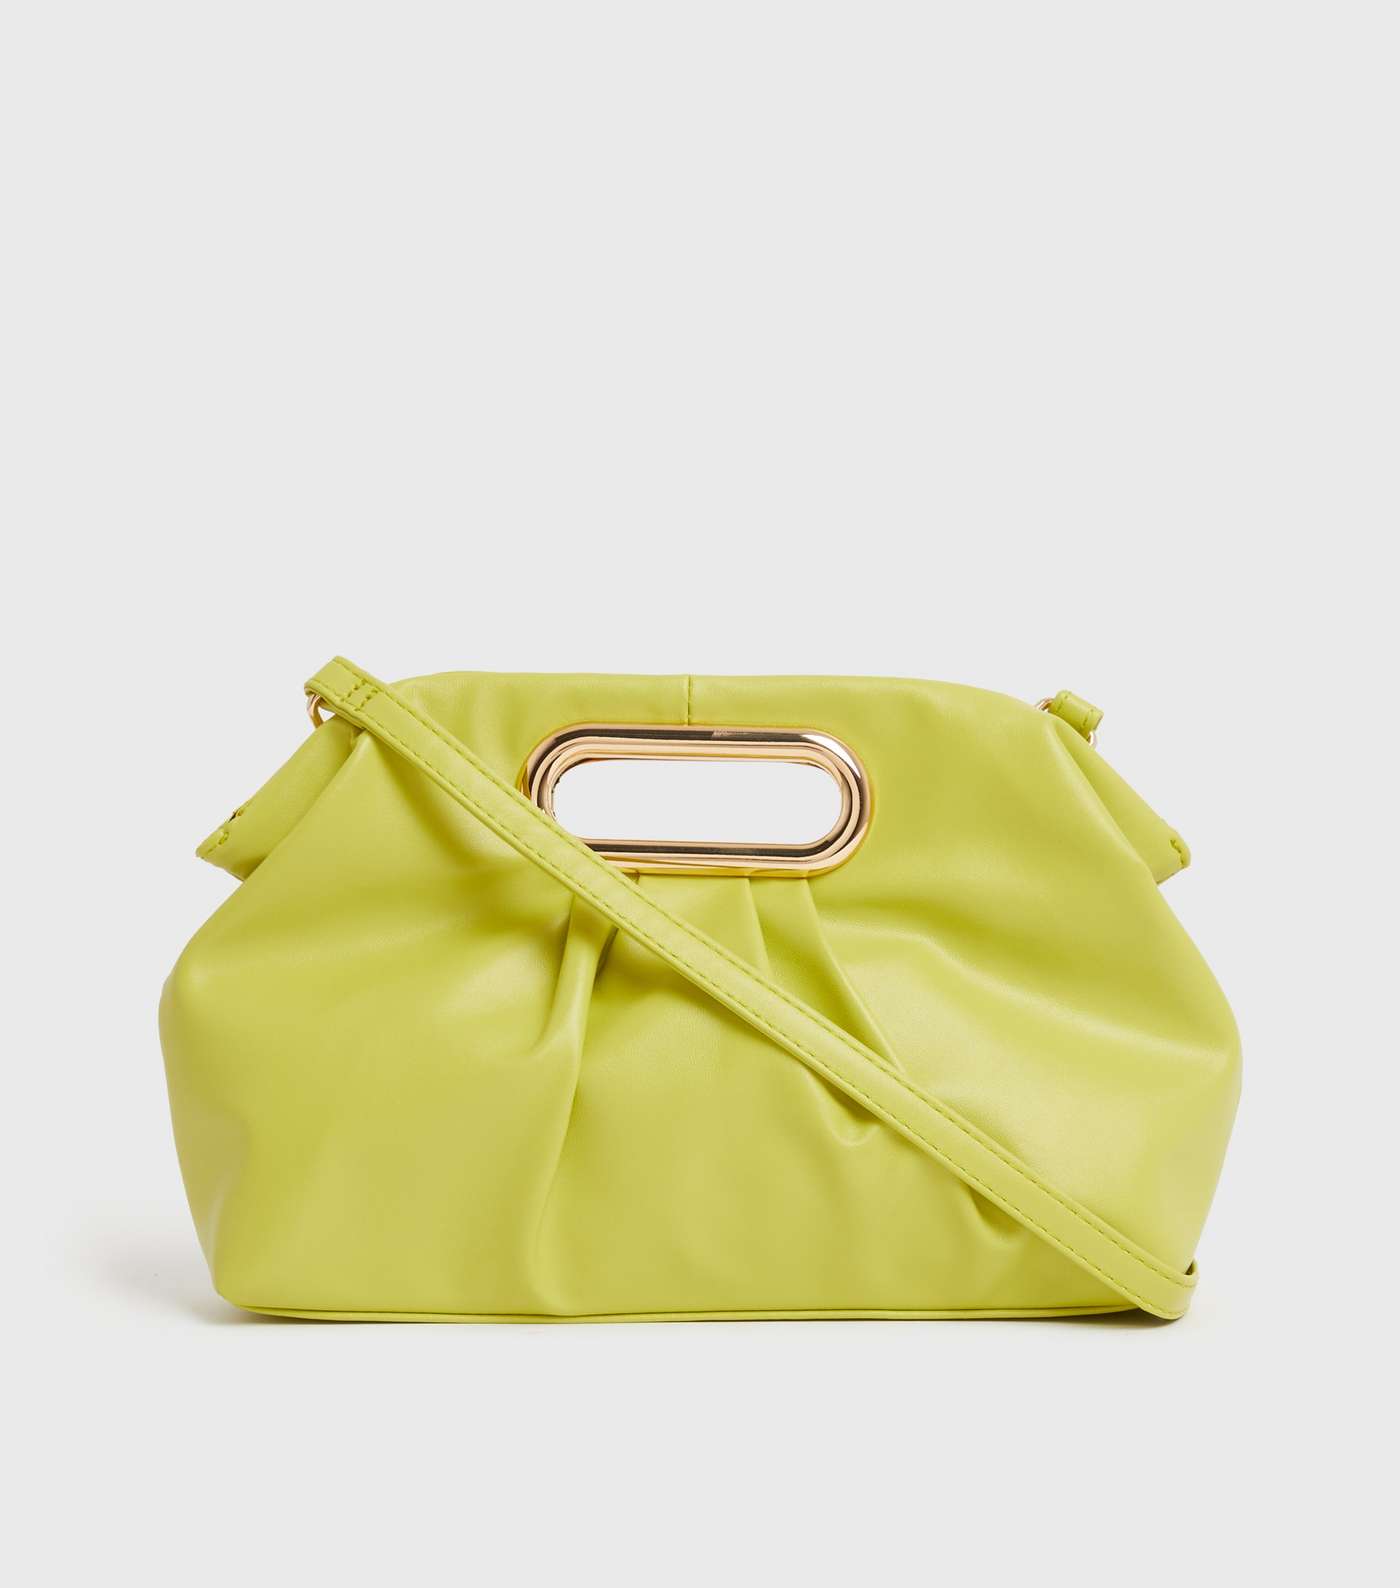 Green Leather-Look Ruched Clutch Bag